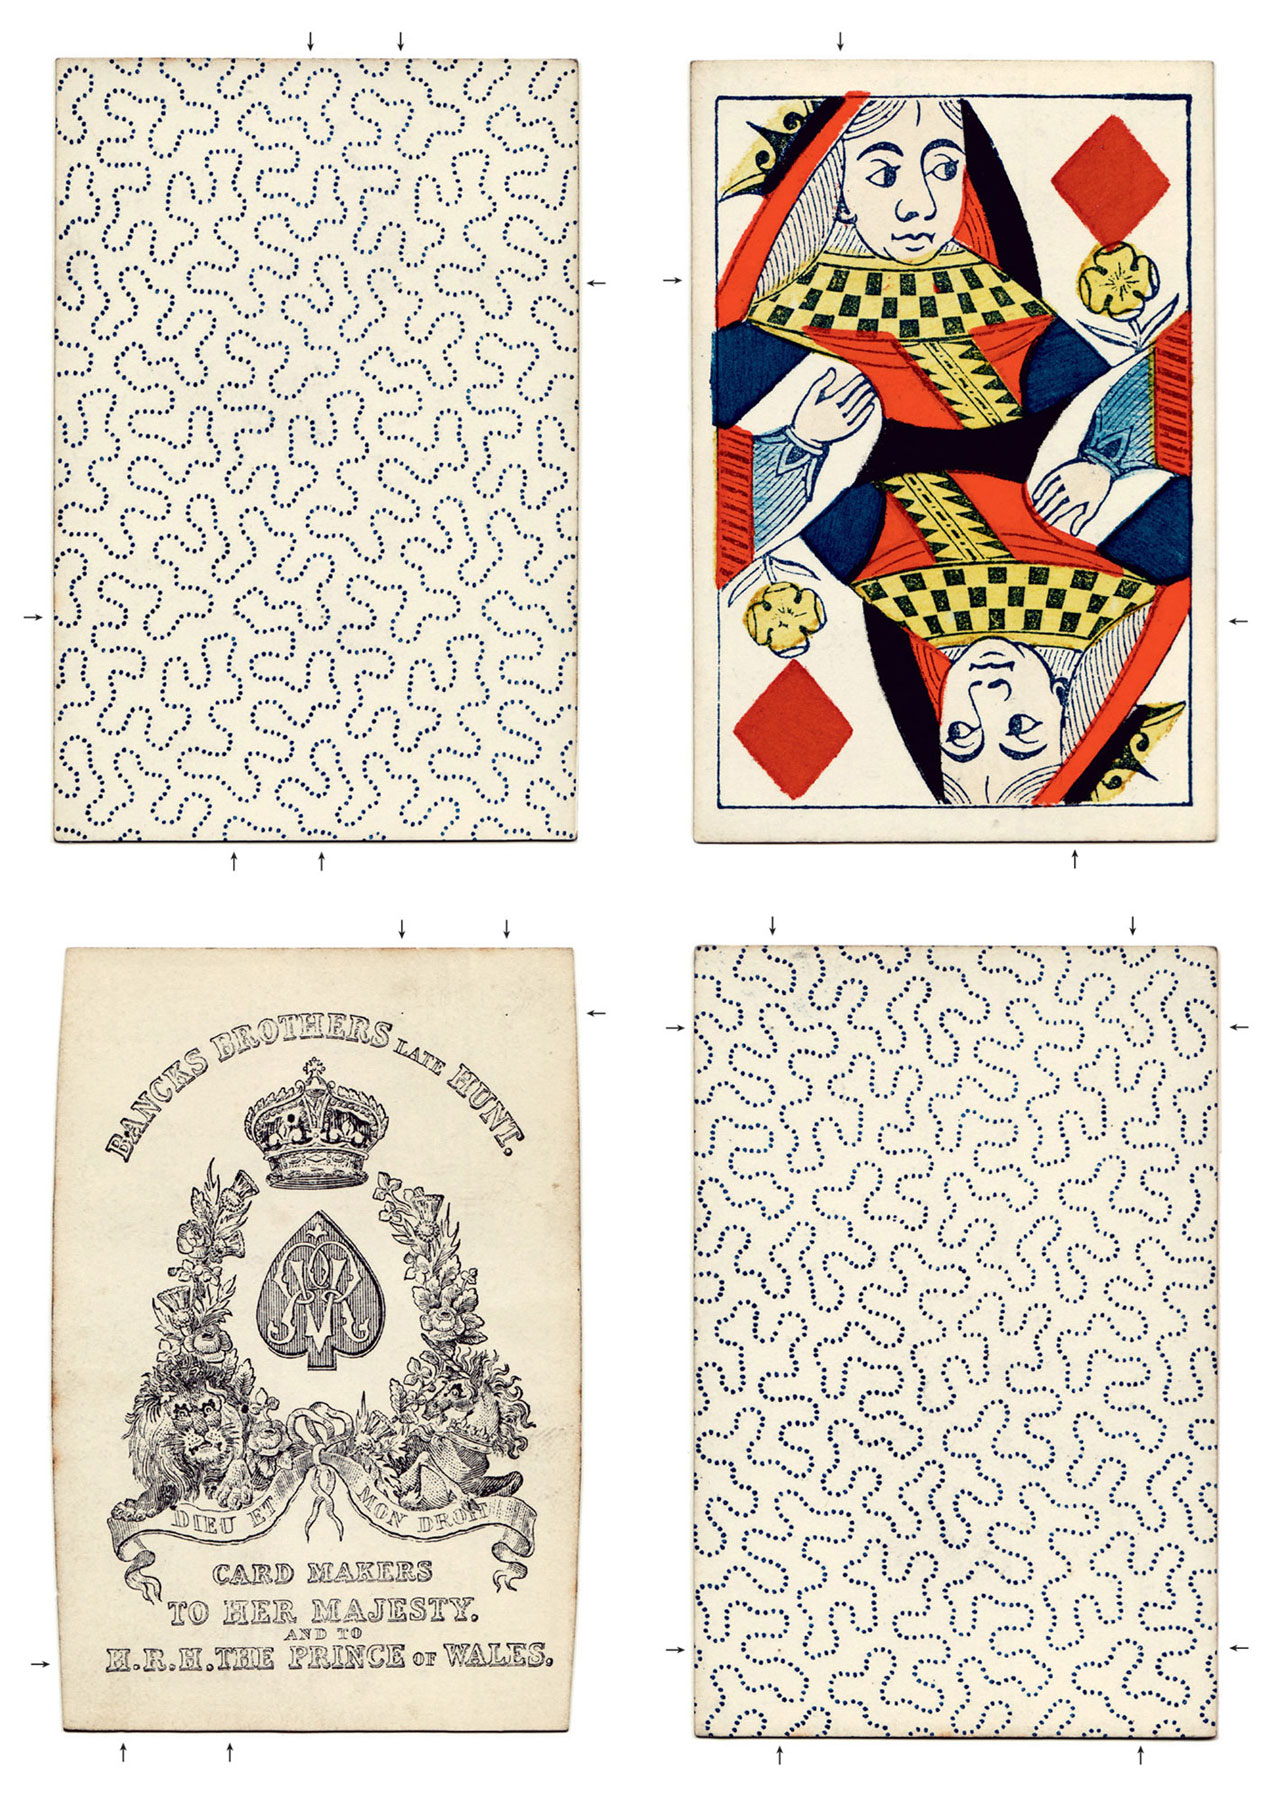 Scans of four cards from a deck of Bancks Brothers Late Hunt playing cards. The cards are marked personally by Charlier circa 1870s-1880s and feature lines and arrows which indicate the locations of the tiny pin-pricks that allow the cardsharp to determine by touch the suit and value of each card. 